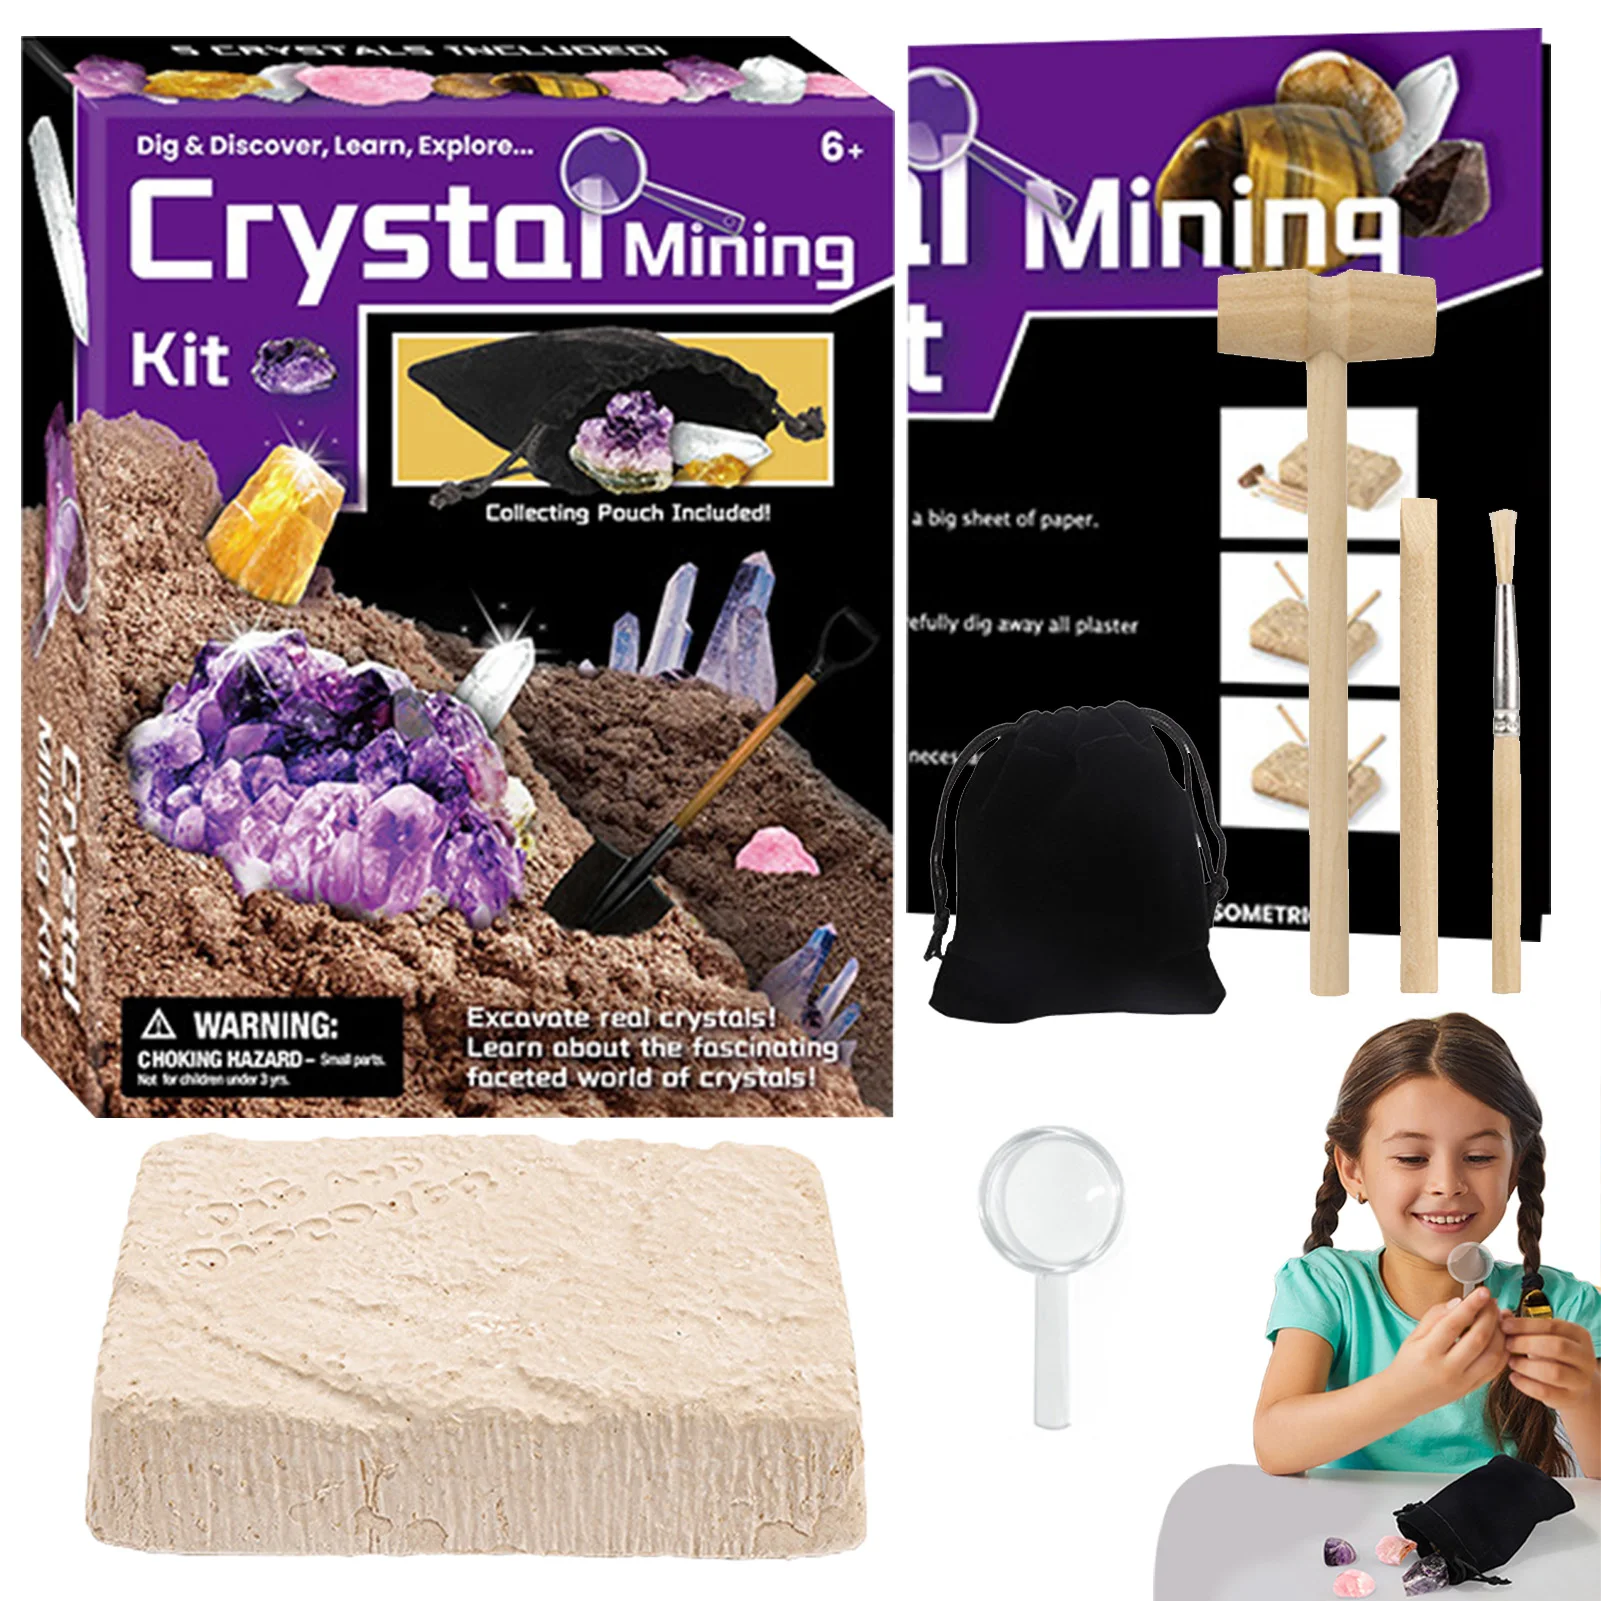 

Crystal Mining Kit Innovative Crystal Excavation Educational Science Kit STEM Toys For Age 6 Up Kids Great Mineralogy Geology ST